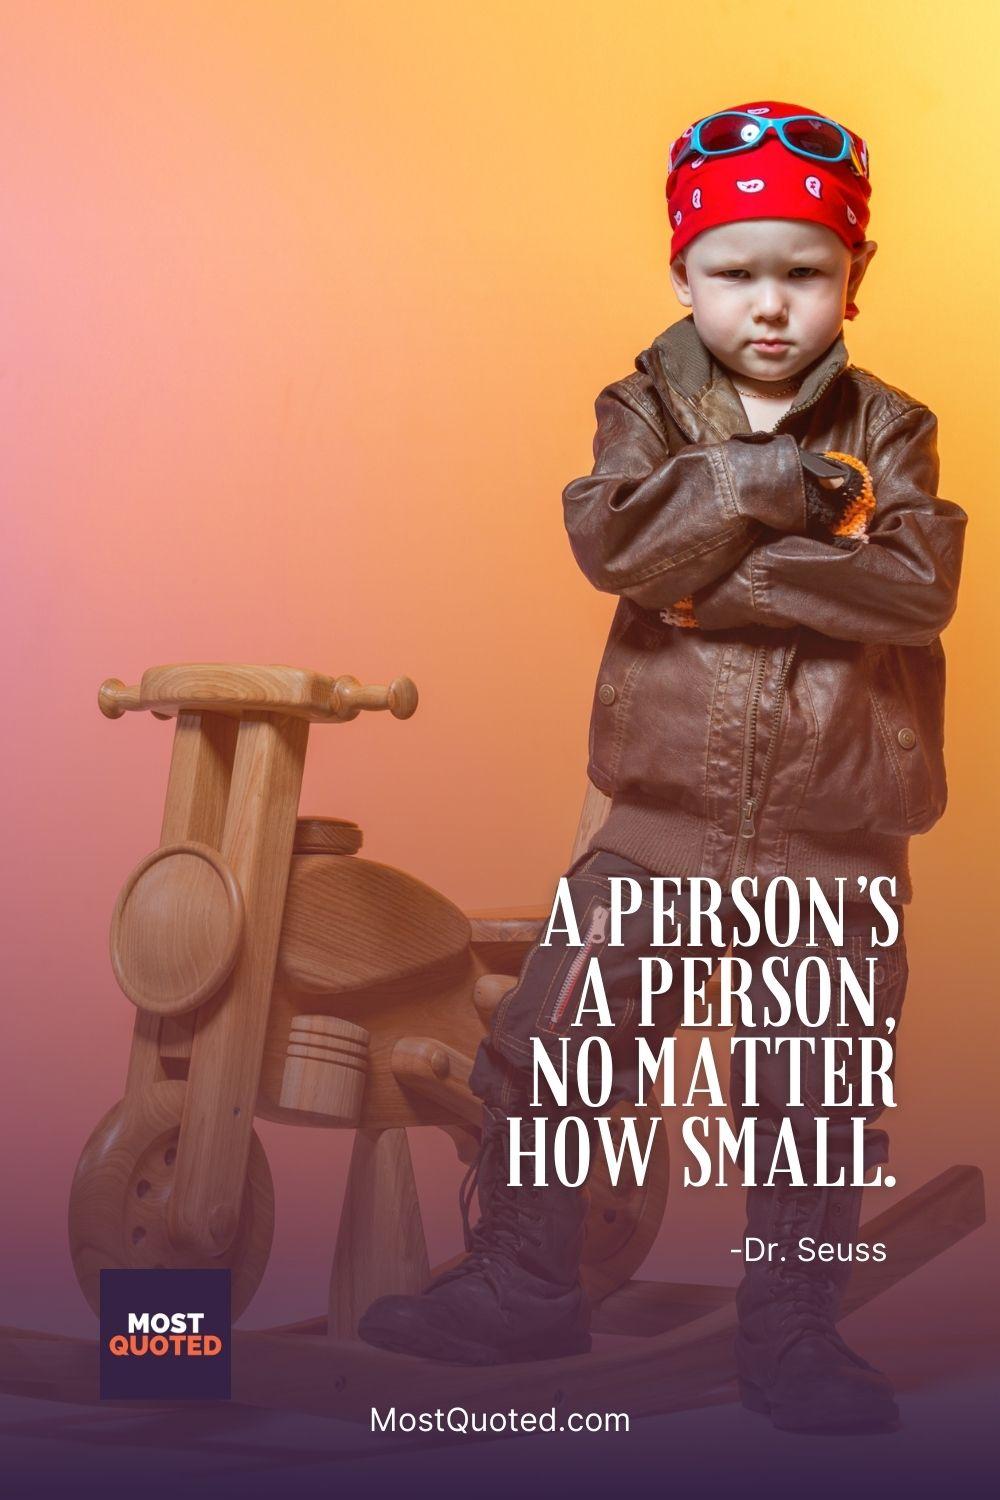 A person’s a person, no matter how small. - Dr. Seuss